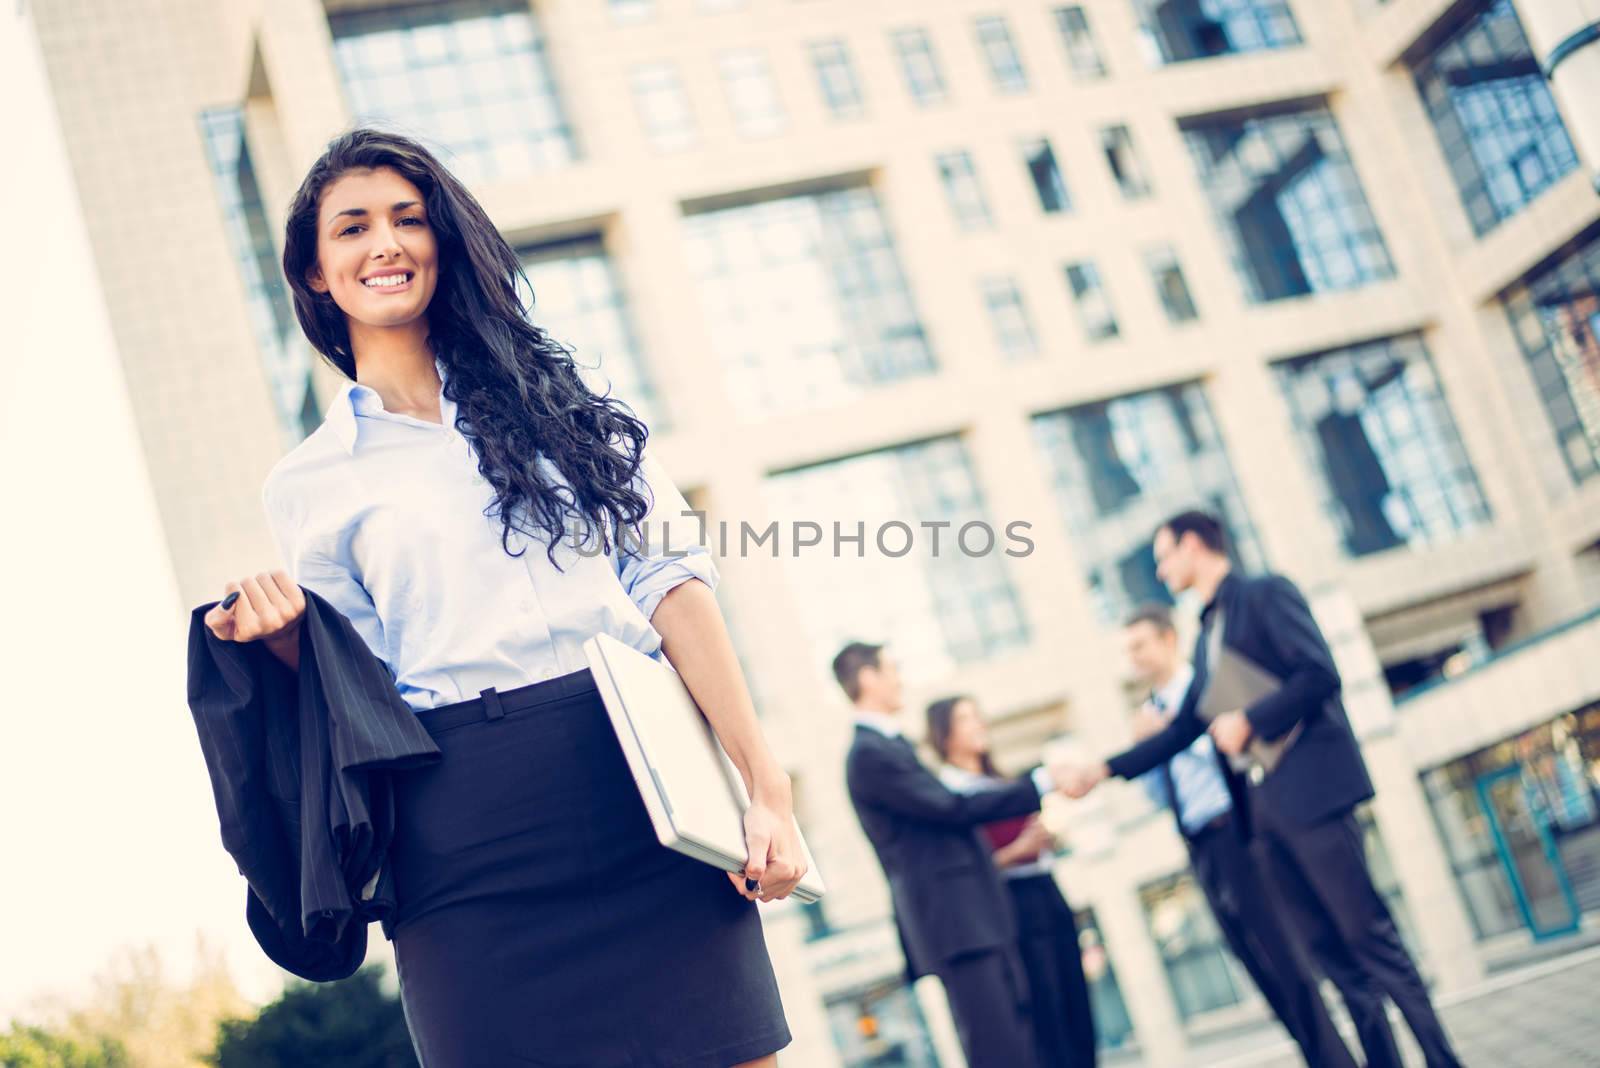 A young businesswoman standing in front of office building separated from the rest of the business team, holding laptop and looking at the camera.